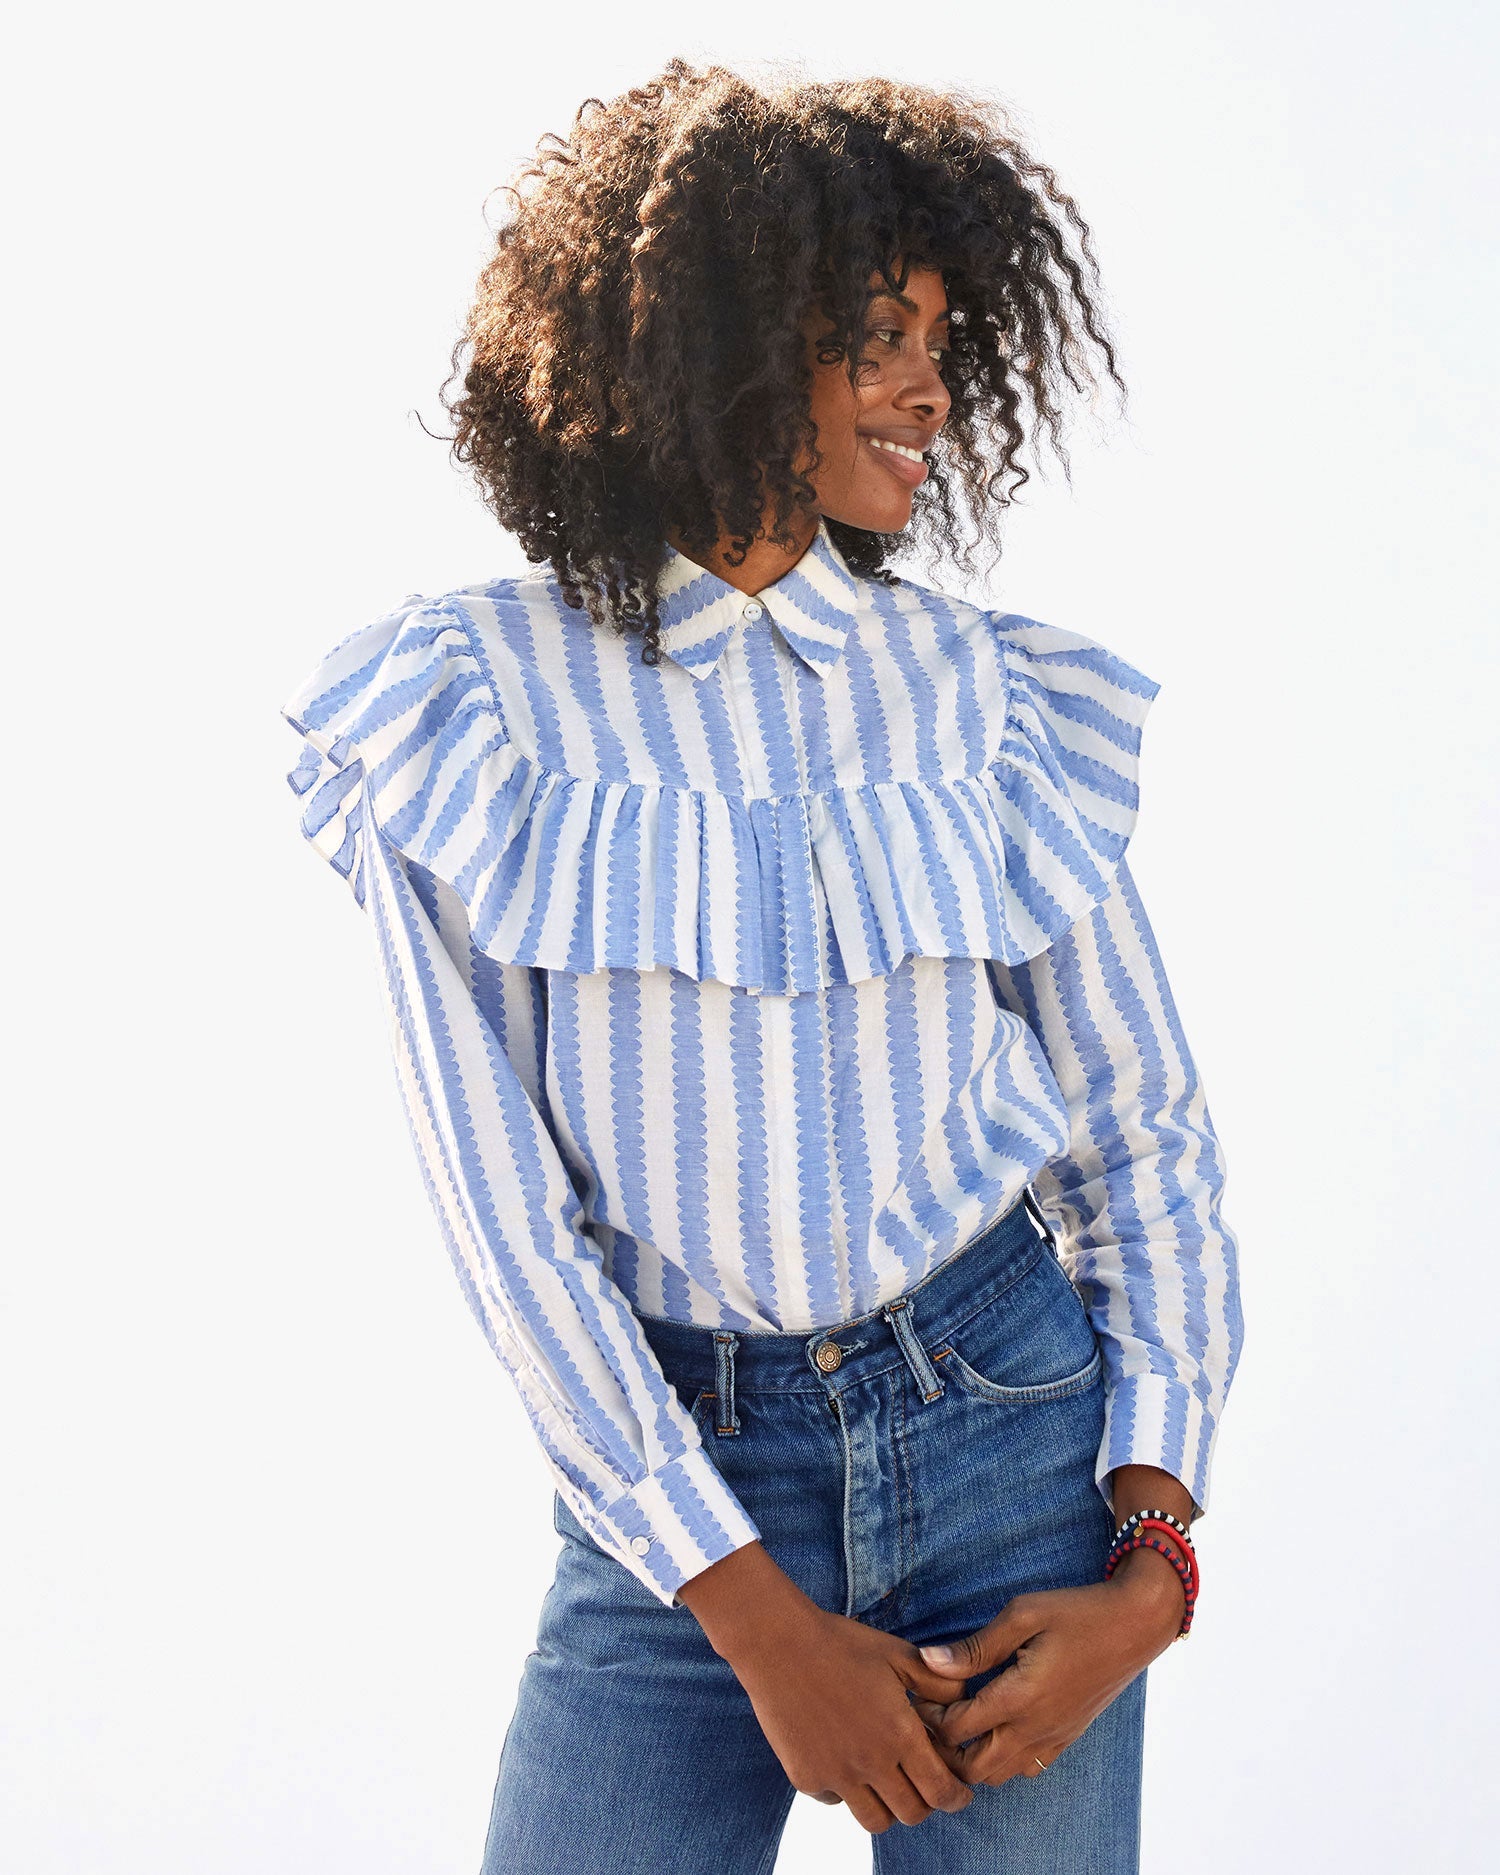 Mecca wearing the Blue & Cream Scallop Stripe Charlotte Blouse tucked in to jeans